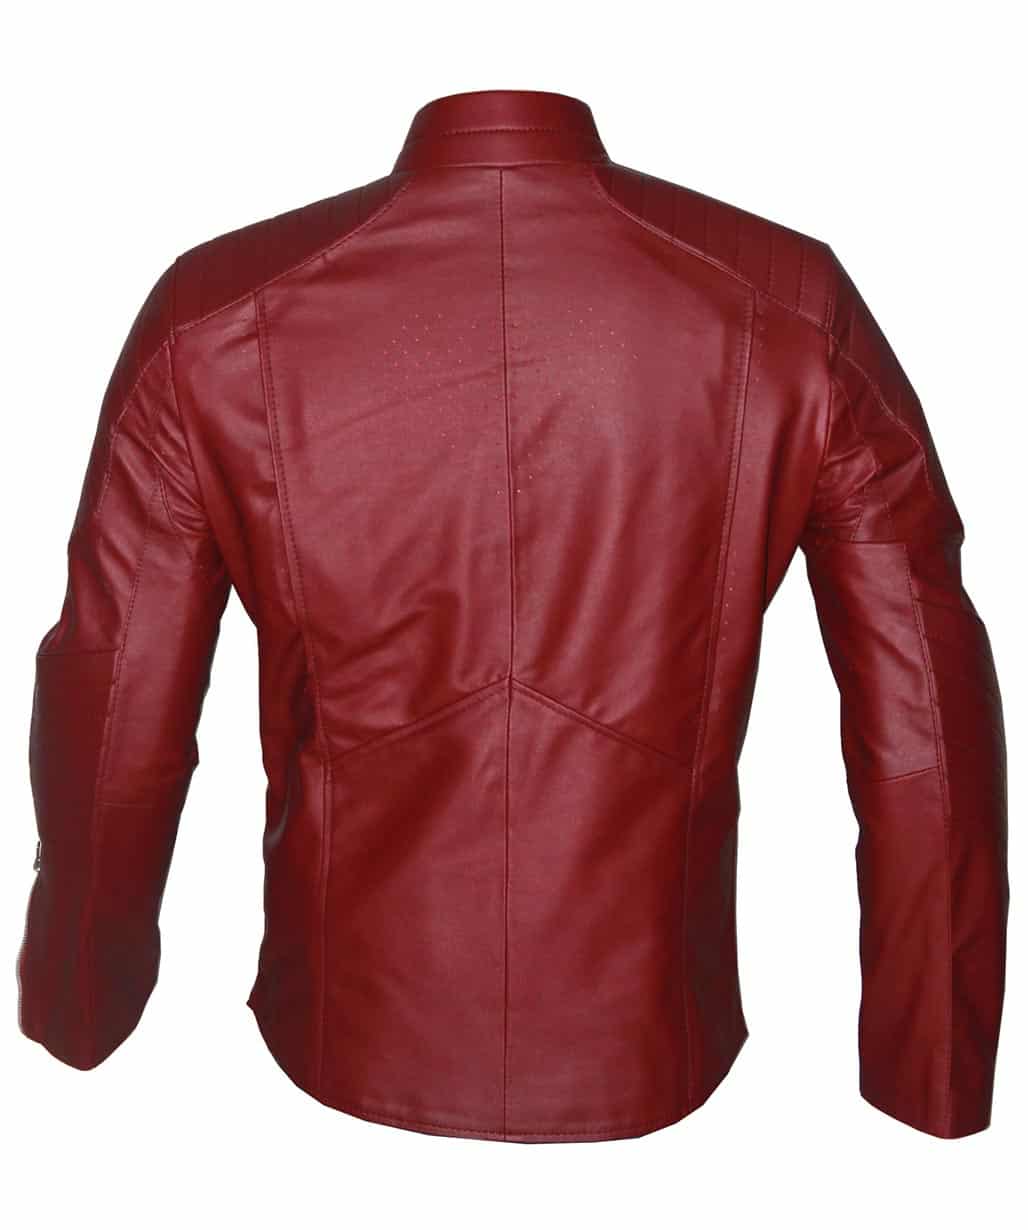 superman-smallville-red-leather-jacket-costume-online